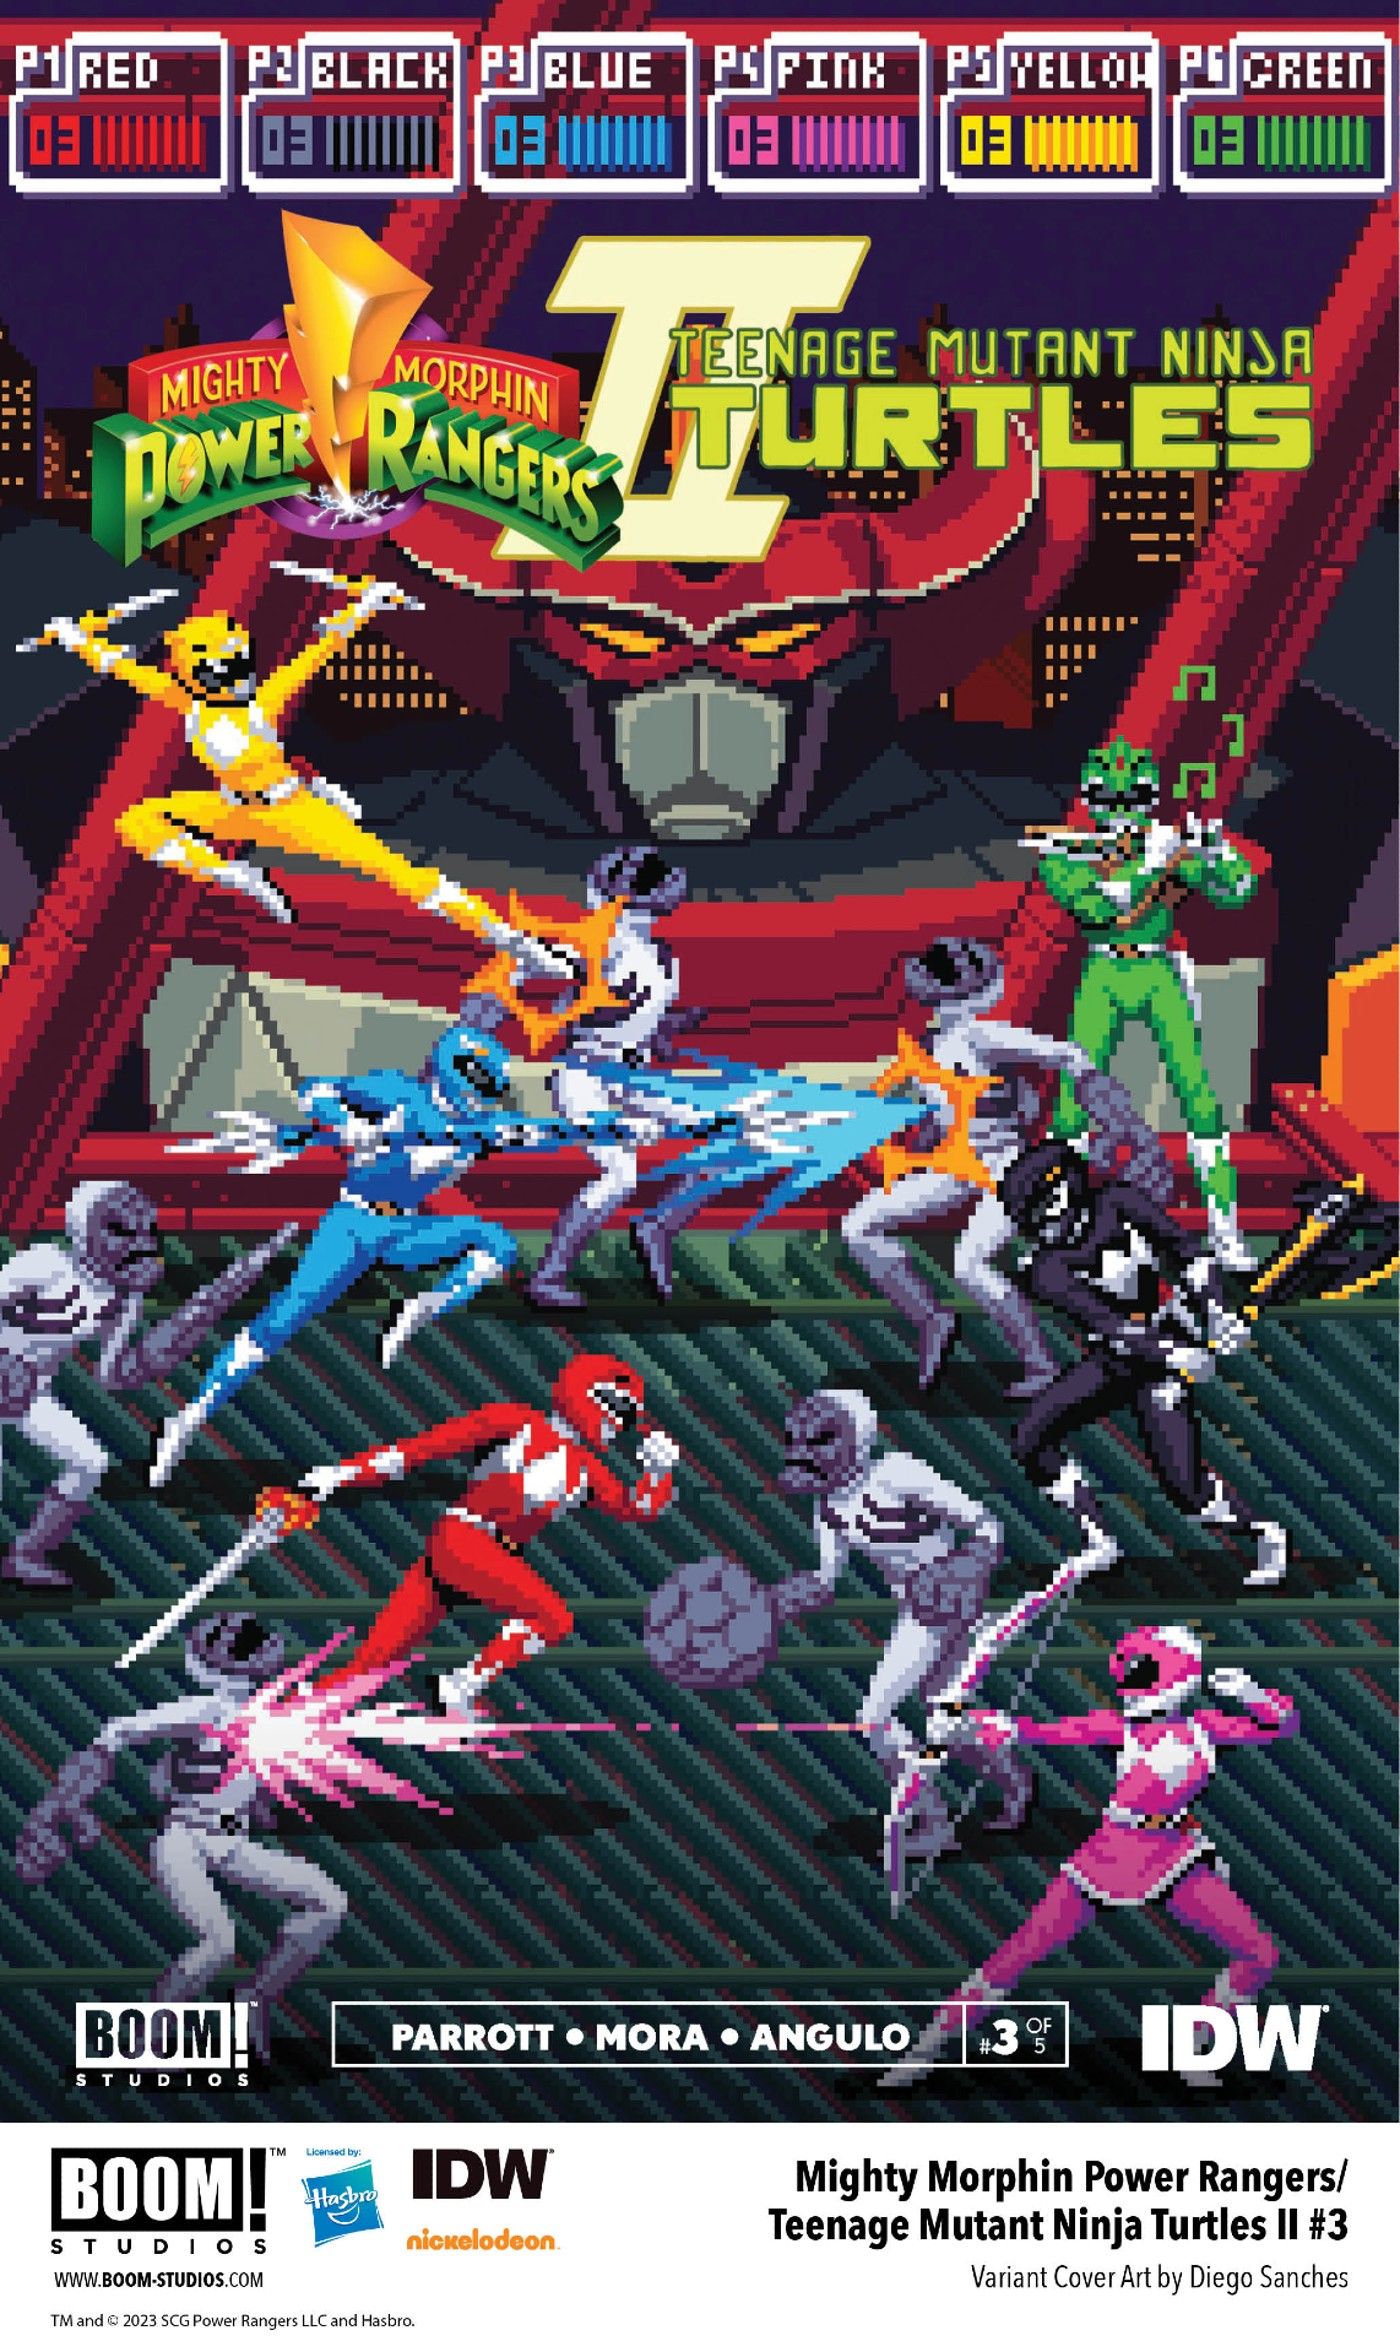 Power Rangers TMNT arcade cover by Diego Sanches